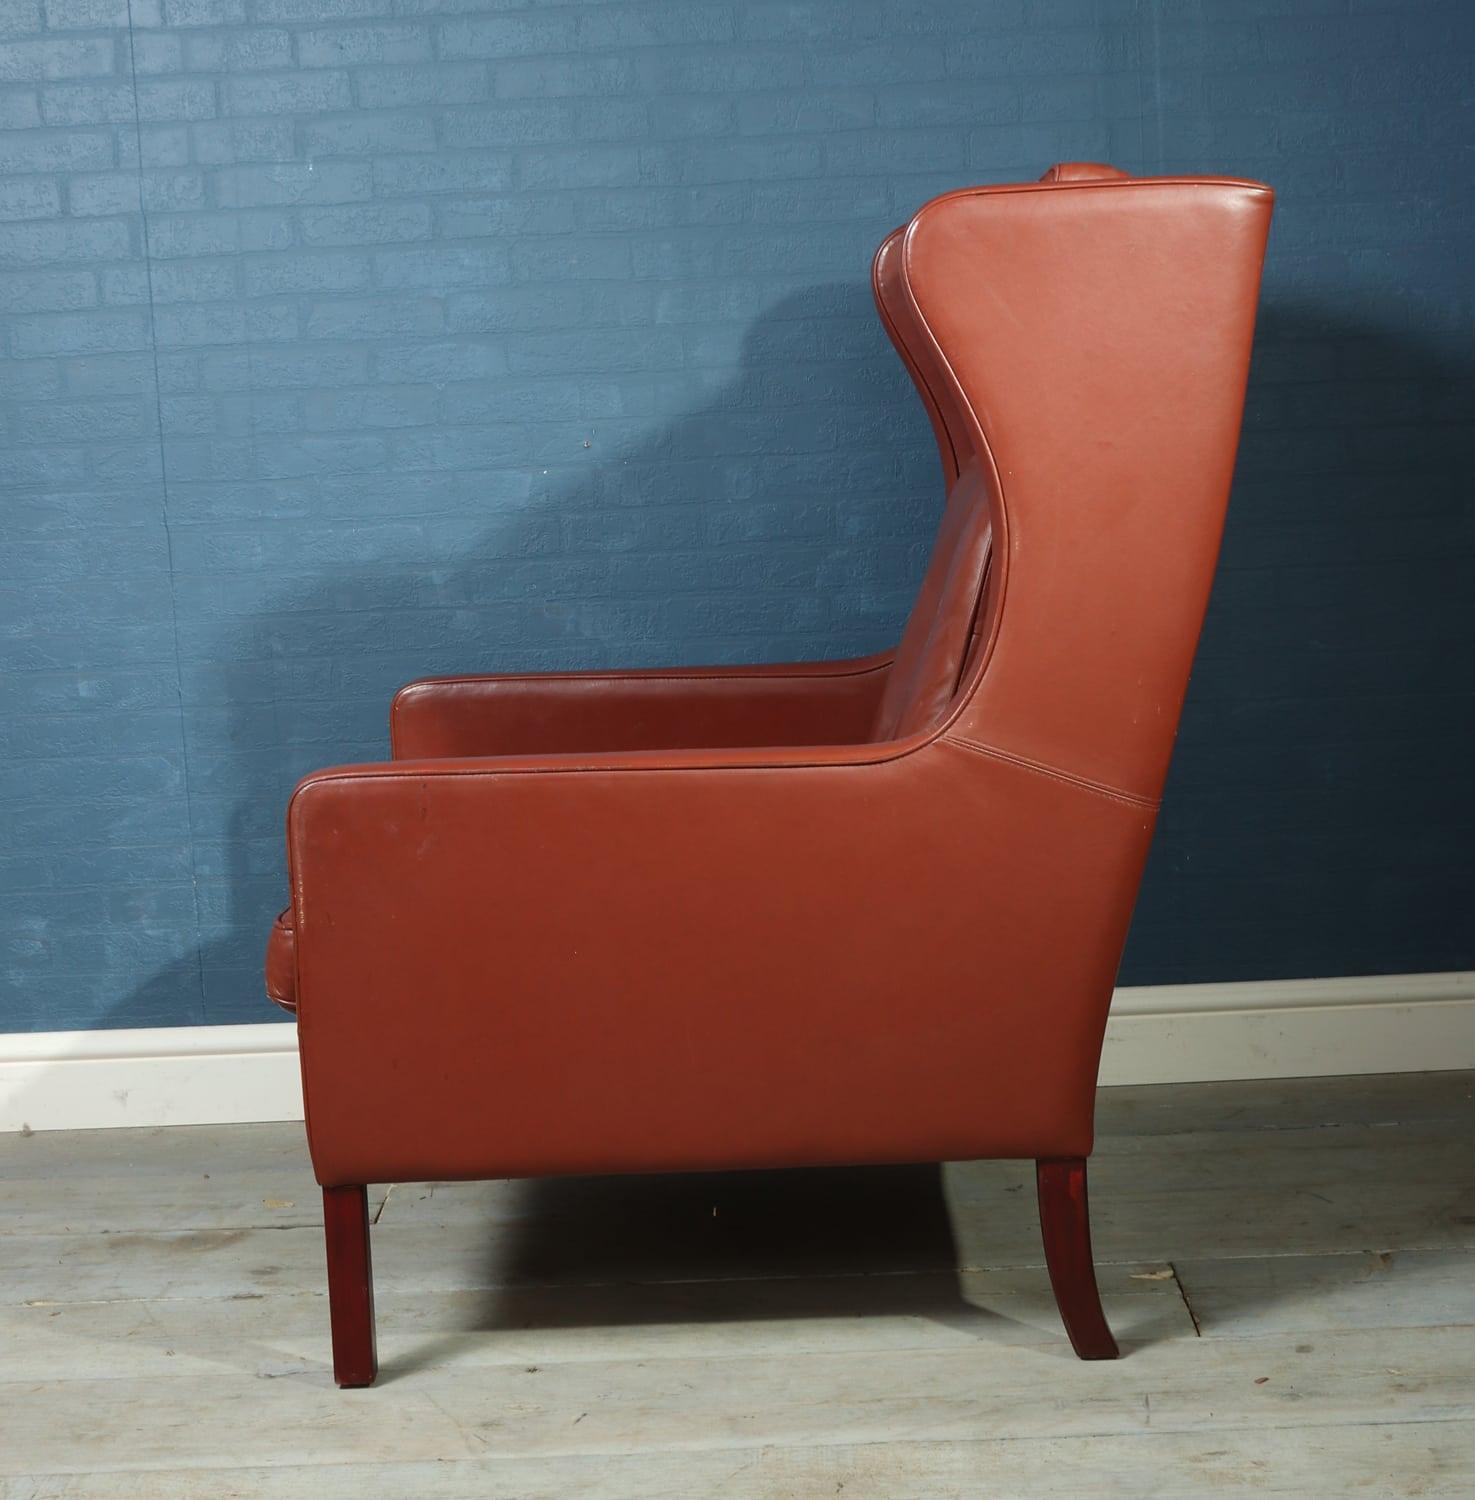 Late 20th Century Midcentury Danish Leather Wing Chair by Stouby, circa 1970